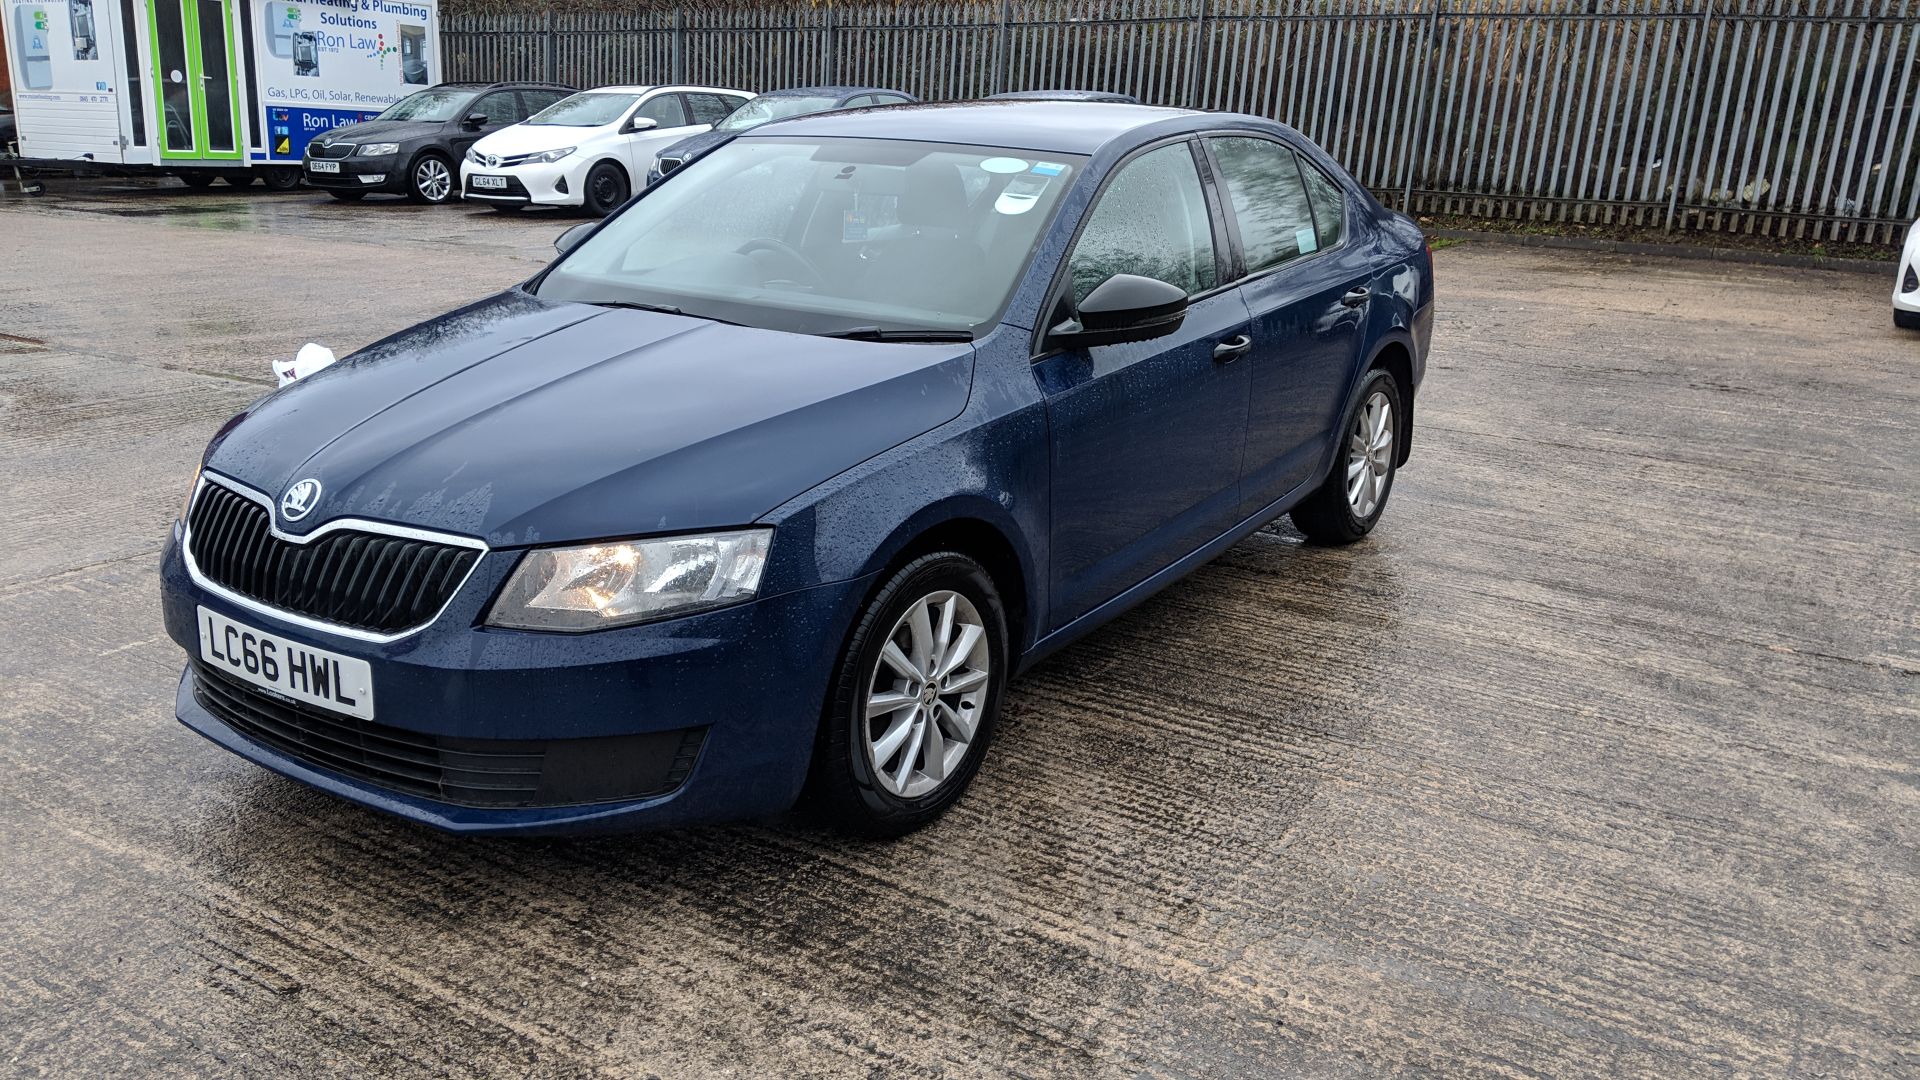 LC66 HWL Skoda Octavia S TDI S-A 1598cc diesel engine. Colour: Blue. First registered: 06.02.17. - Image 44 of 47